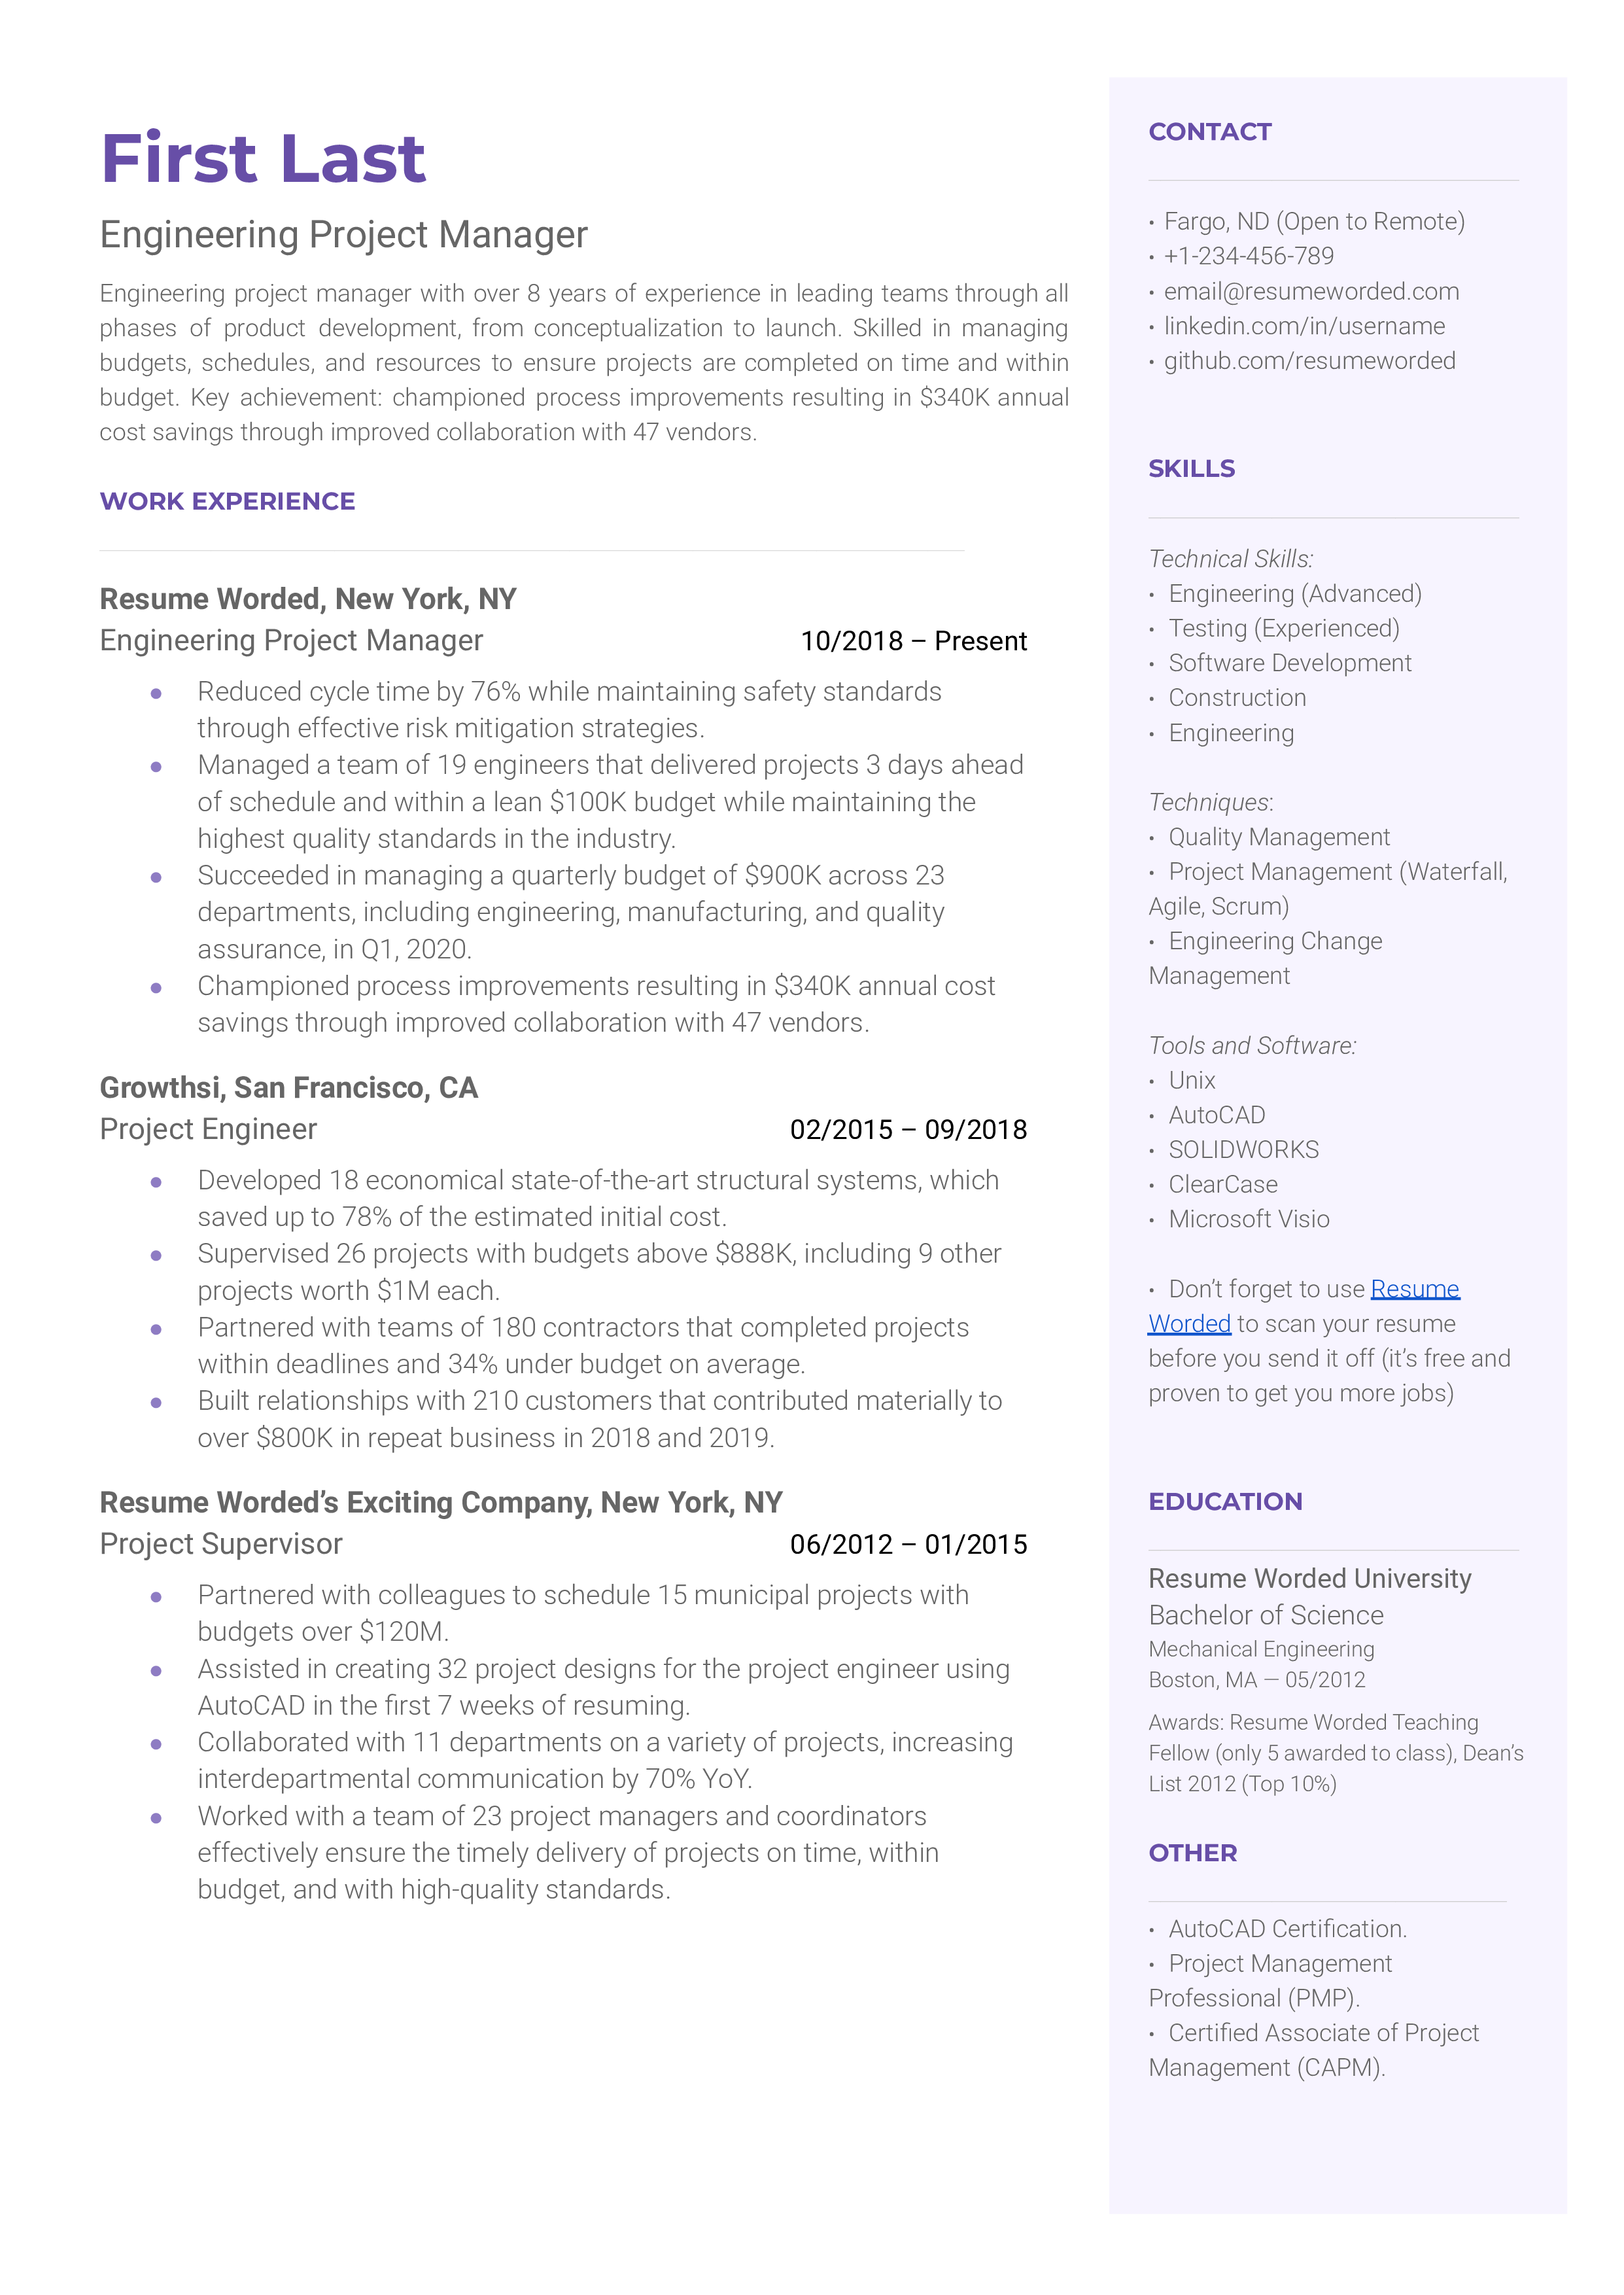 Engineering Project Manager Resume Template + Example